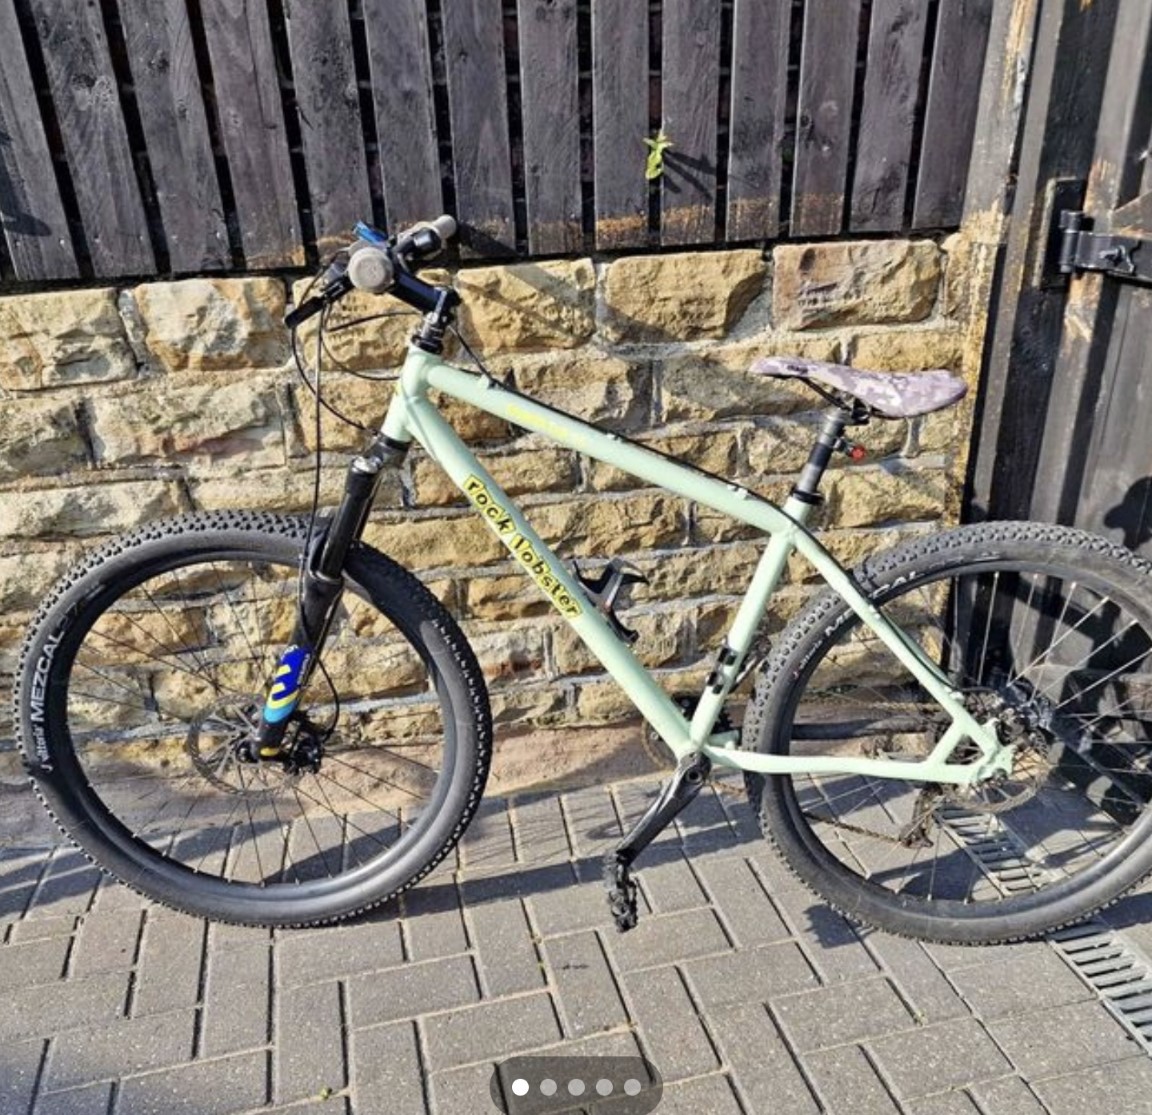 Pale green Rock Lobster cycle stolen from the University of York on 23-24 April. Please get in touch with any information. Have you seen it, do you know where it is now? Email IET@northyorkshire.police.uk with any information Ref: 12240071742